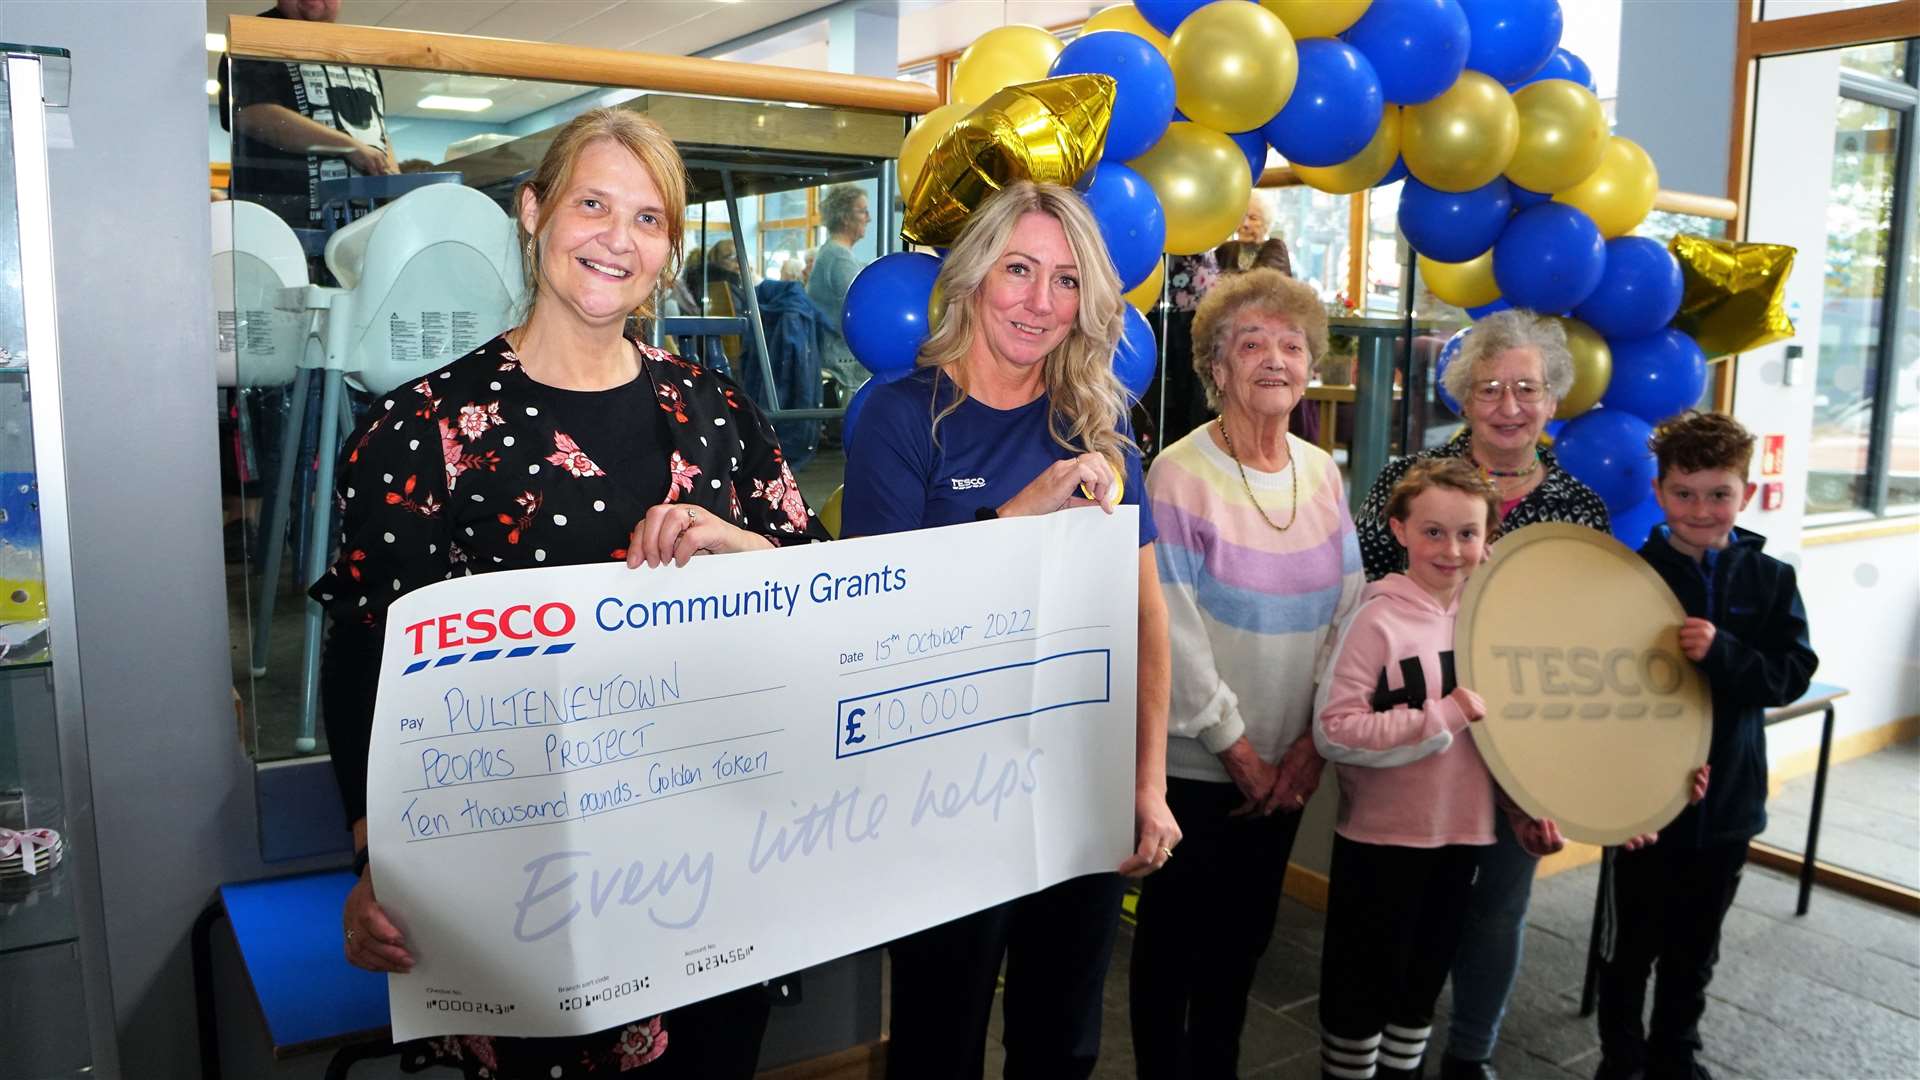 Wick Tesco handed over a cheque for £10K to the PPP Lunch Club for the Elderly. From left, Jennifer Harvey (development officer at PPP), Karen Center (Tesco community champion), Kathleen Sinclair from the lunch club along with Jane McCarthy who picked PPP's lunch club as the beneficiary and her grandchildren Carey and Alex. Picture: DGS